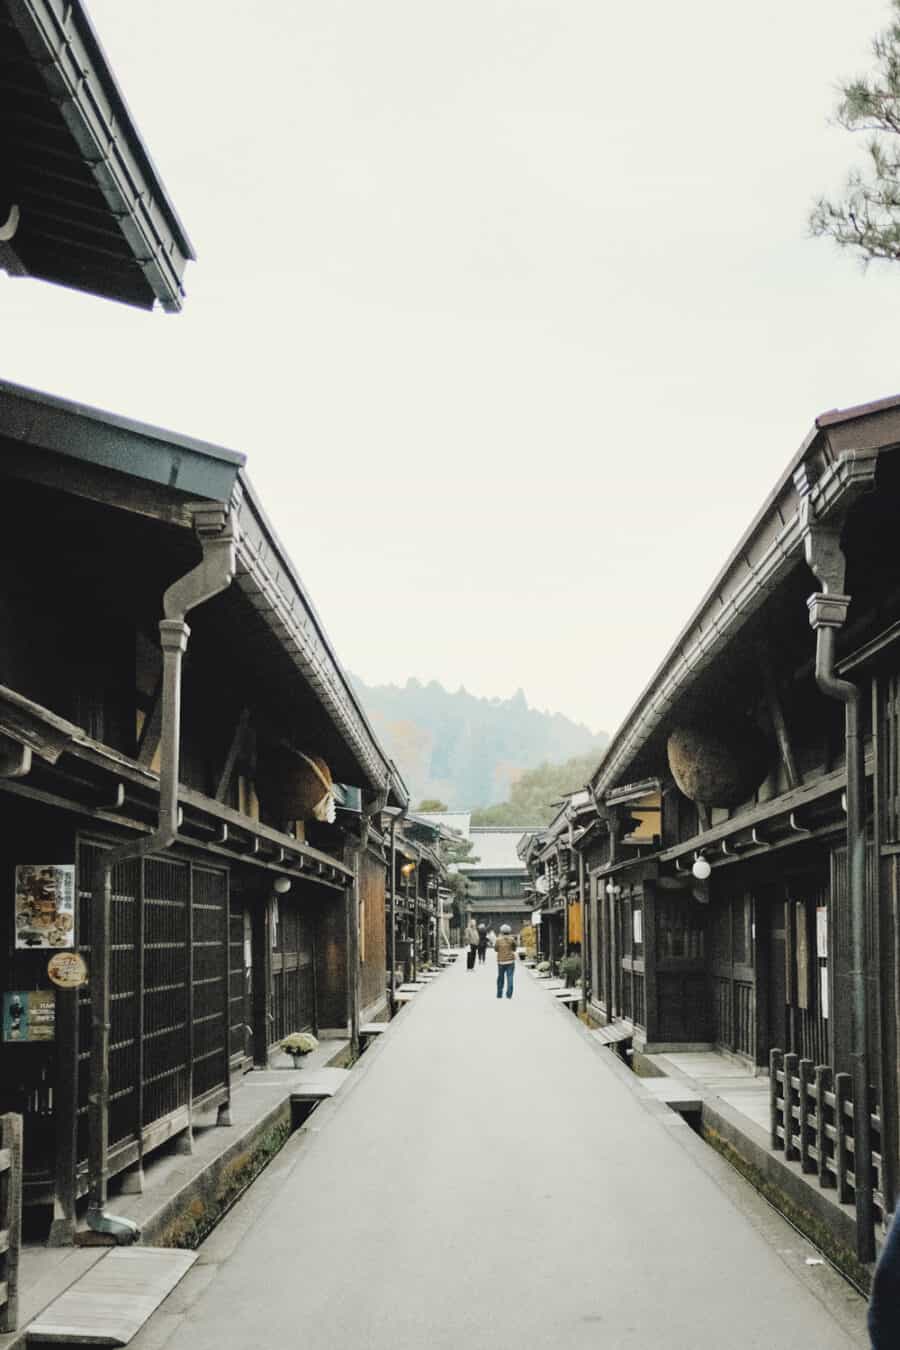 Coco Tran — Aesthetic Travel Blog By Film Photographer Coco Tran https://cocotran.com/where-to-stay-in-takayama/